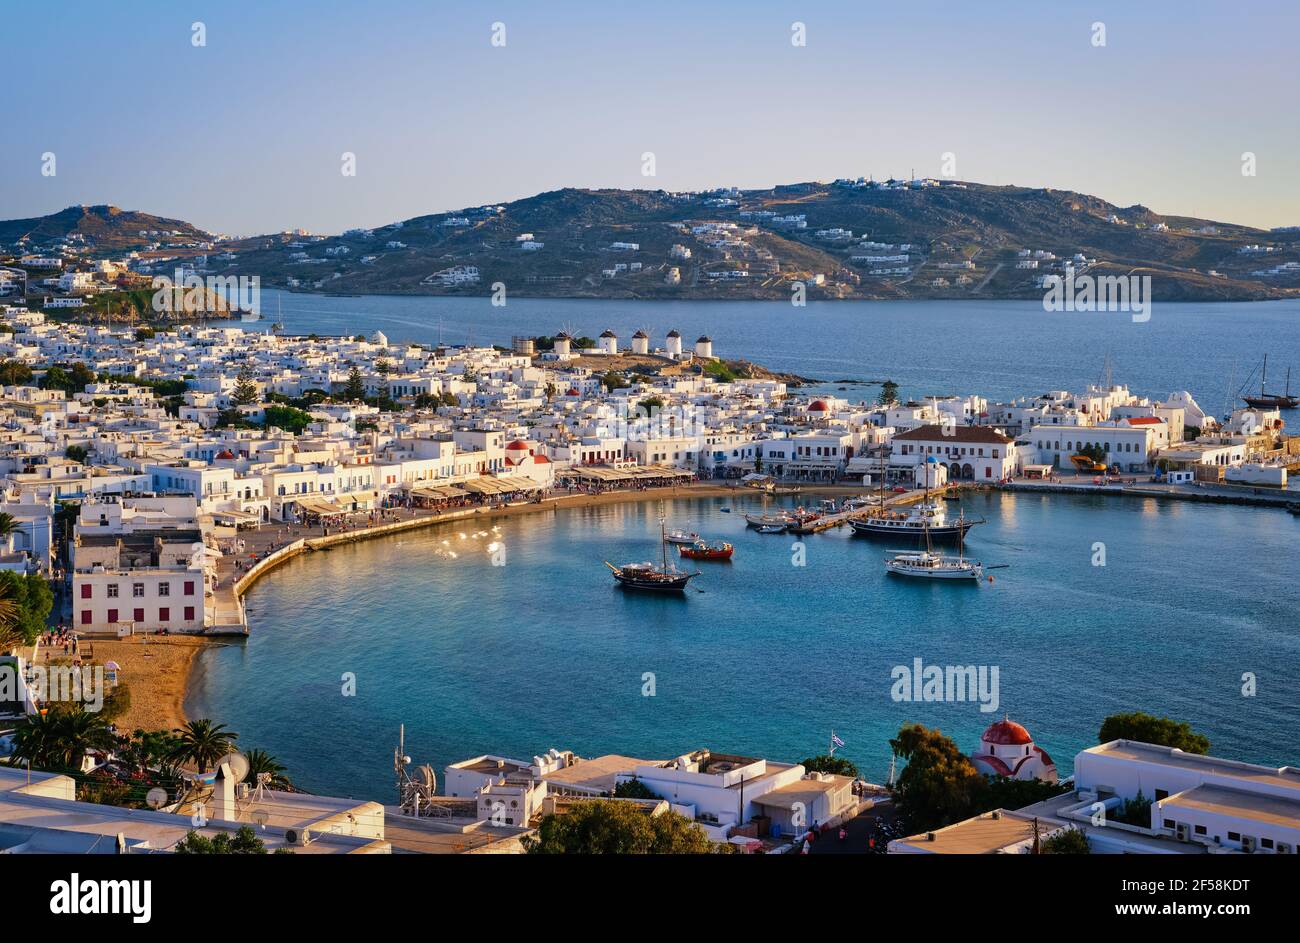 Beautiful sunset view over town of Mykonos, Greece and port. Golden hour, harbor, cruise ships, whitewashed houses. Vacations, Mediterranean lifestyle Stock Photo